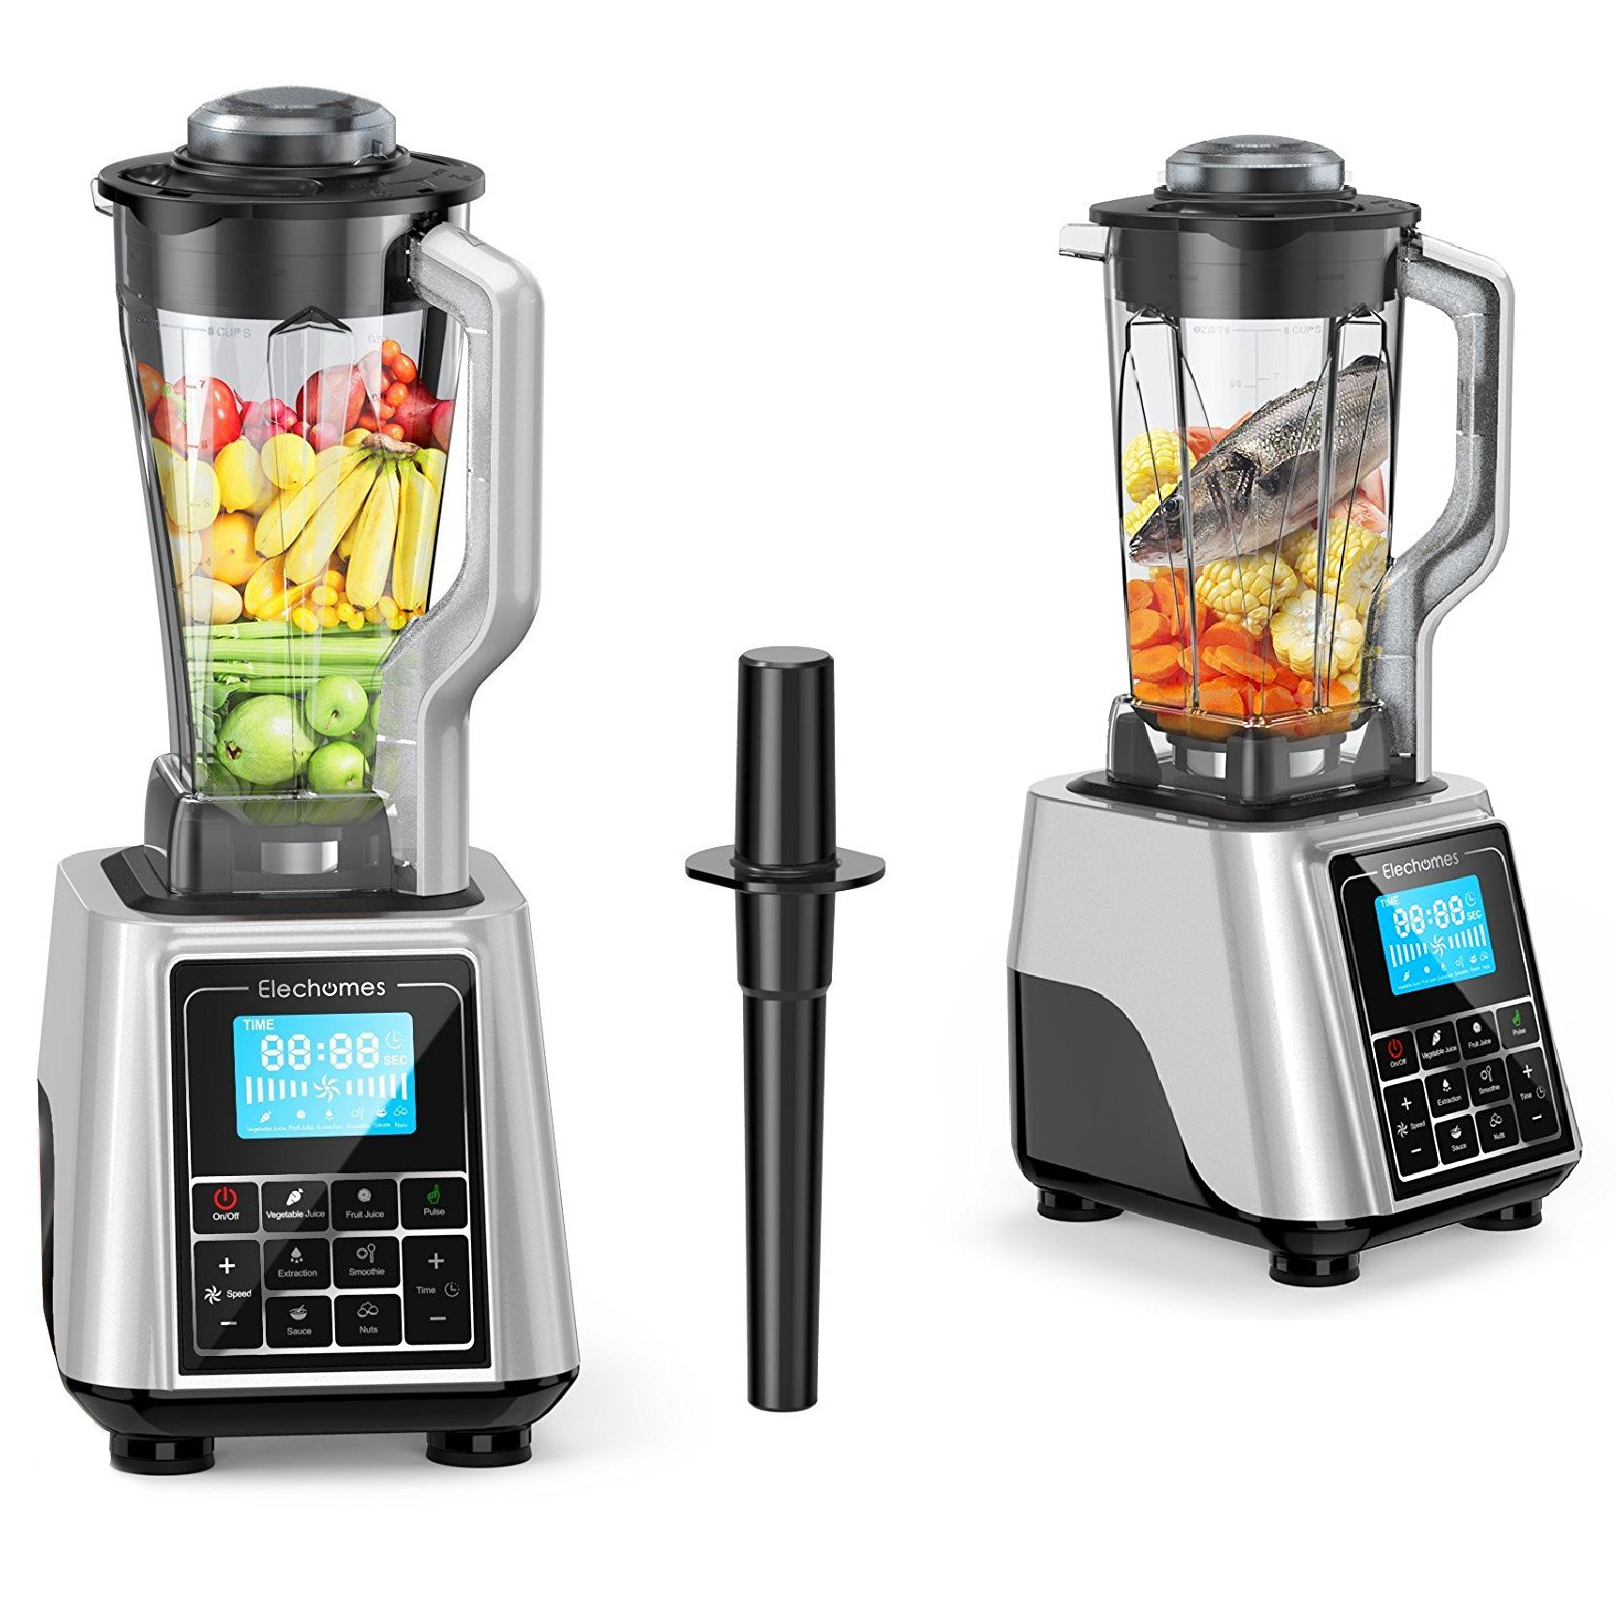 Elchomes 10 Speed Professional Blender Only $119.69 Shipped!